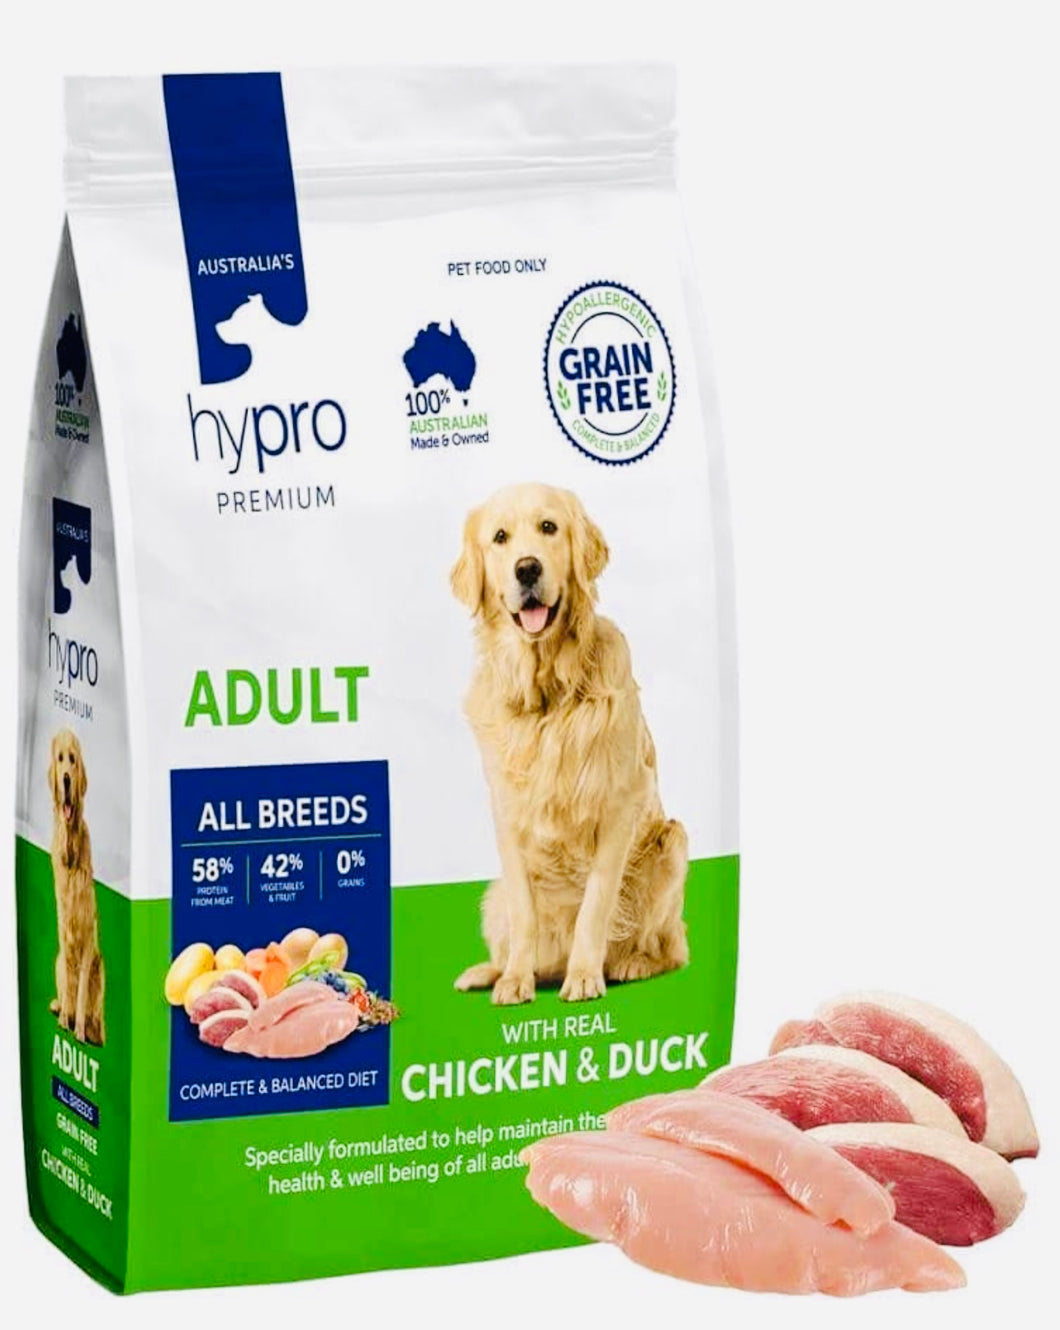 Hypro Chicken and duck dog food 2.5KG